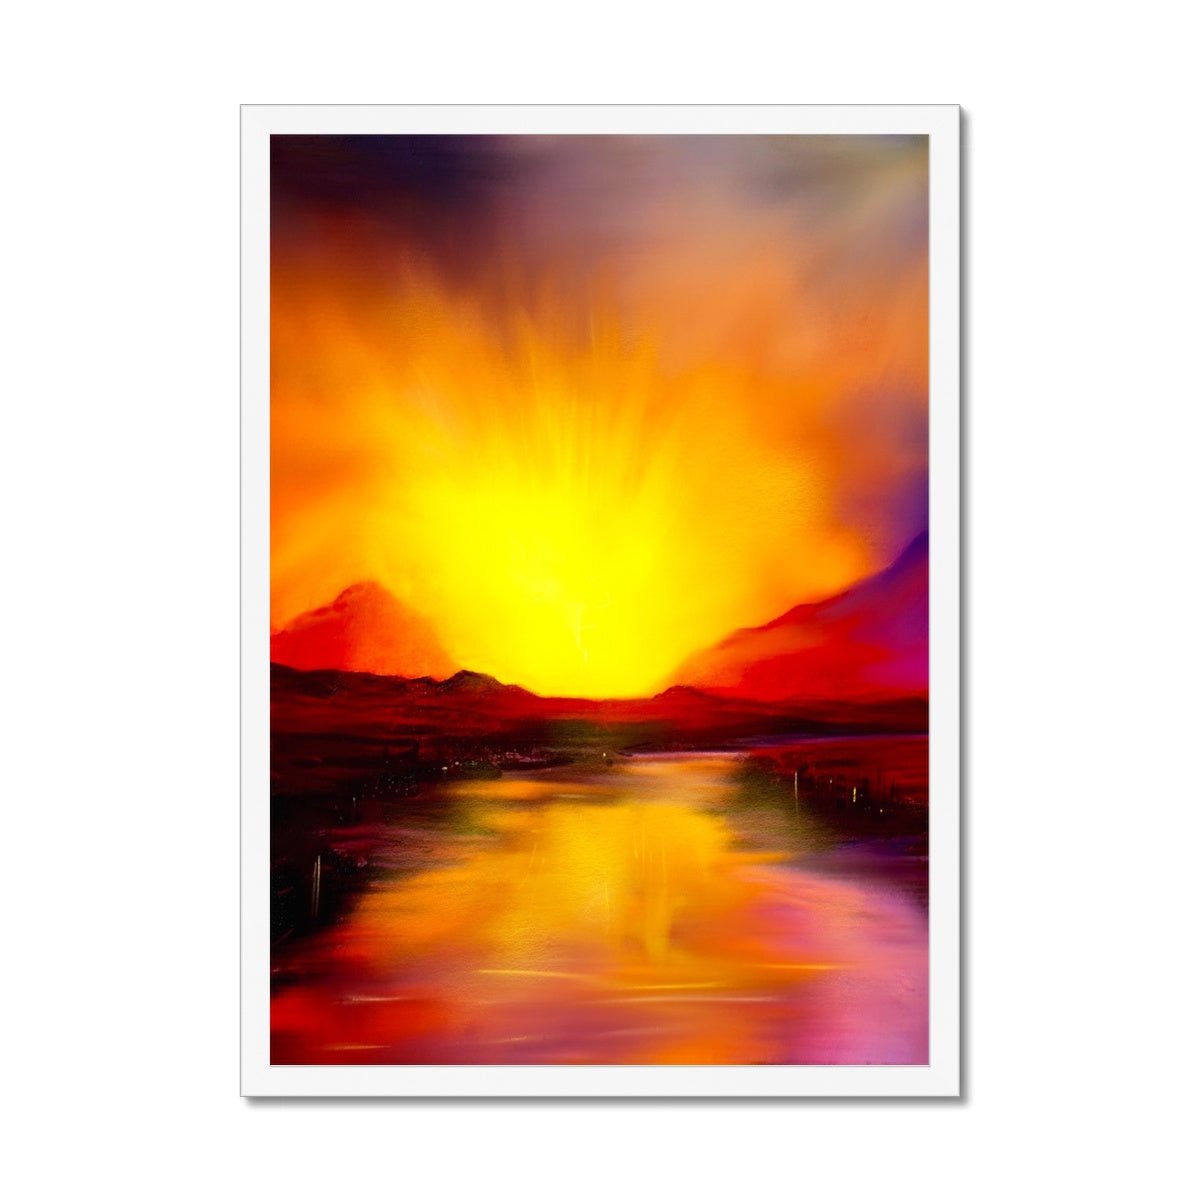 Skye Sunset Painting | Framed Prints From Scotland-Framed Prints-Skye Art Gallery-A2 Portrait-White Frame-Paintings, Prints, Homeware, Art Gifts From Scotland By Scottish Artist Kevin Hunter